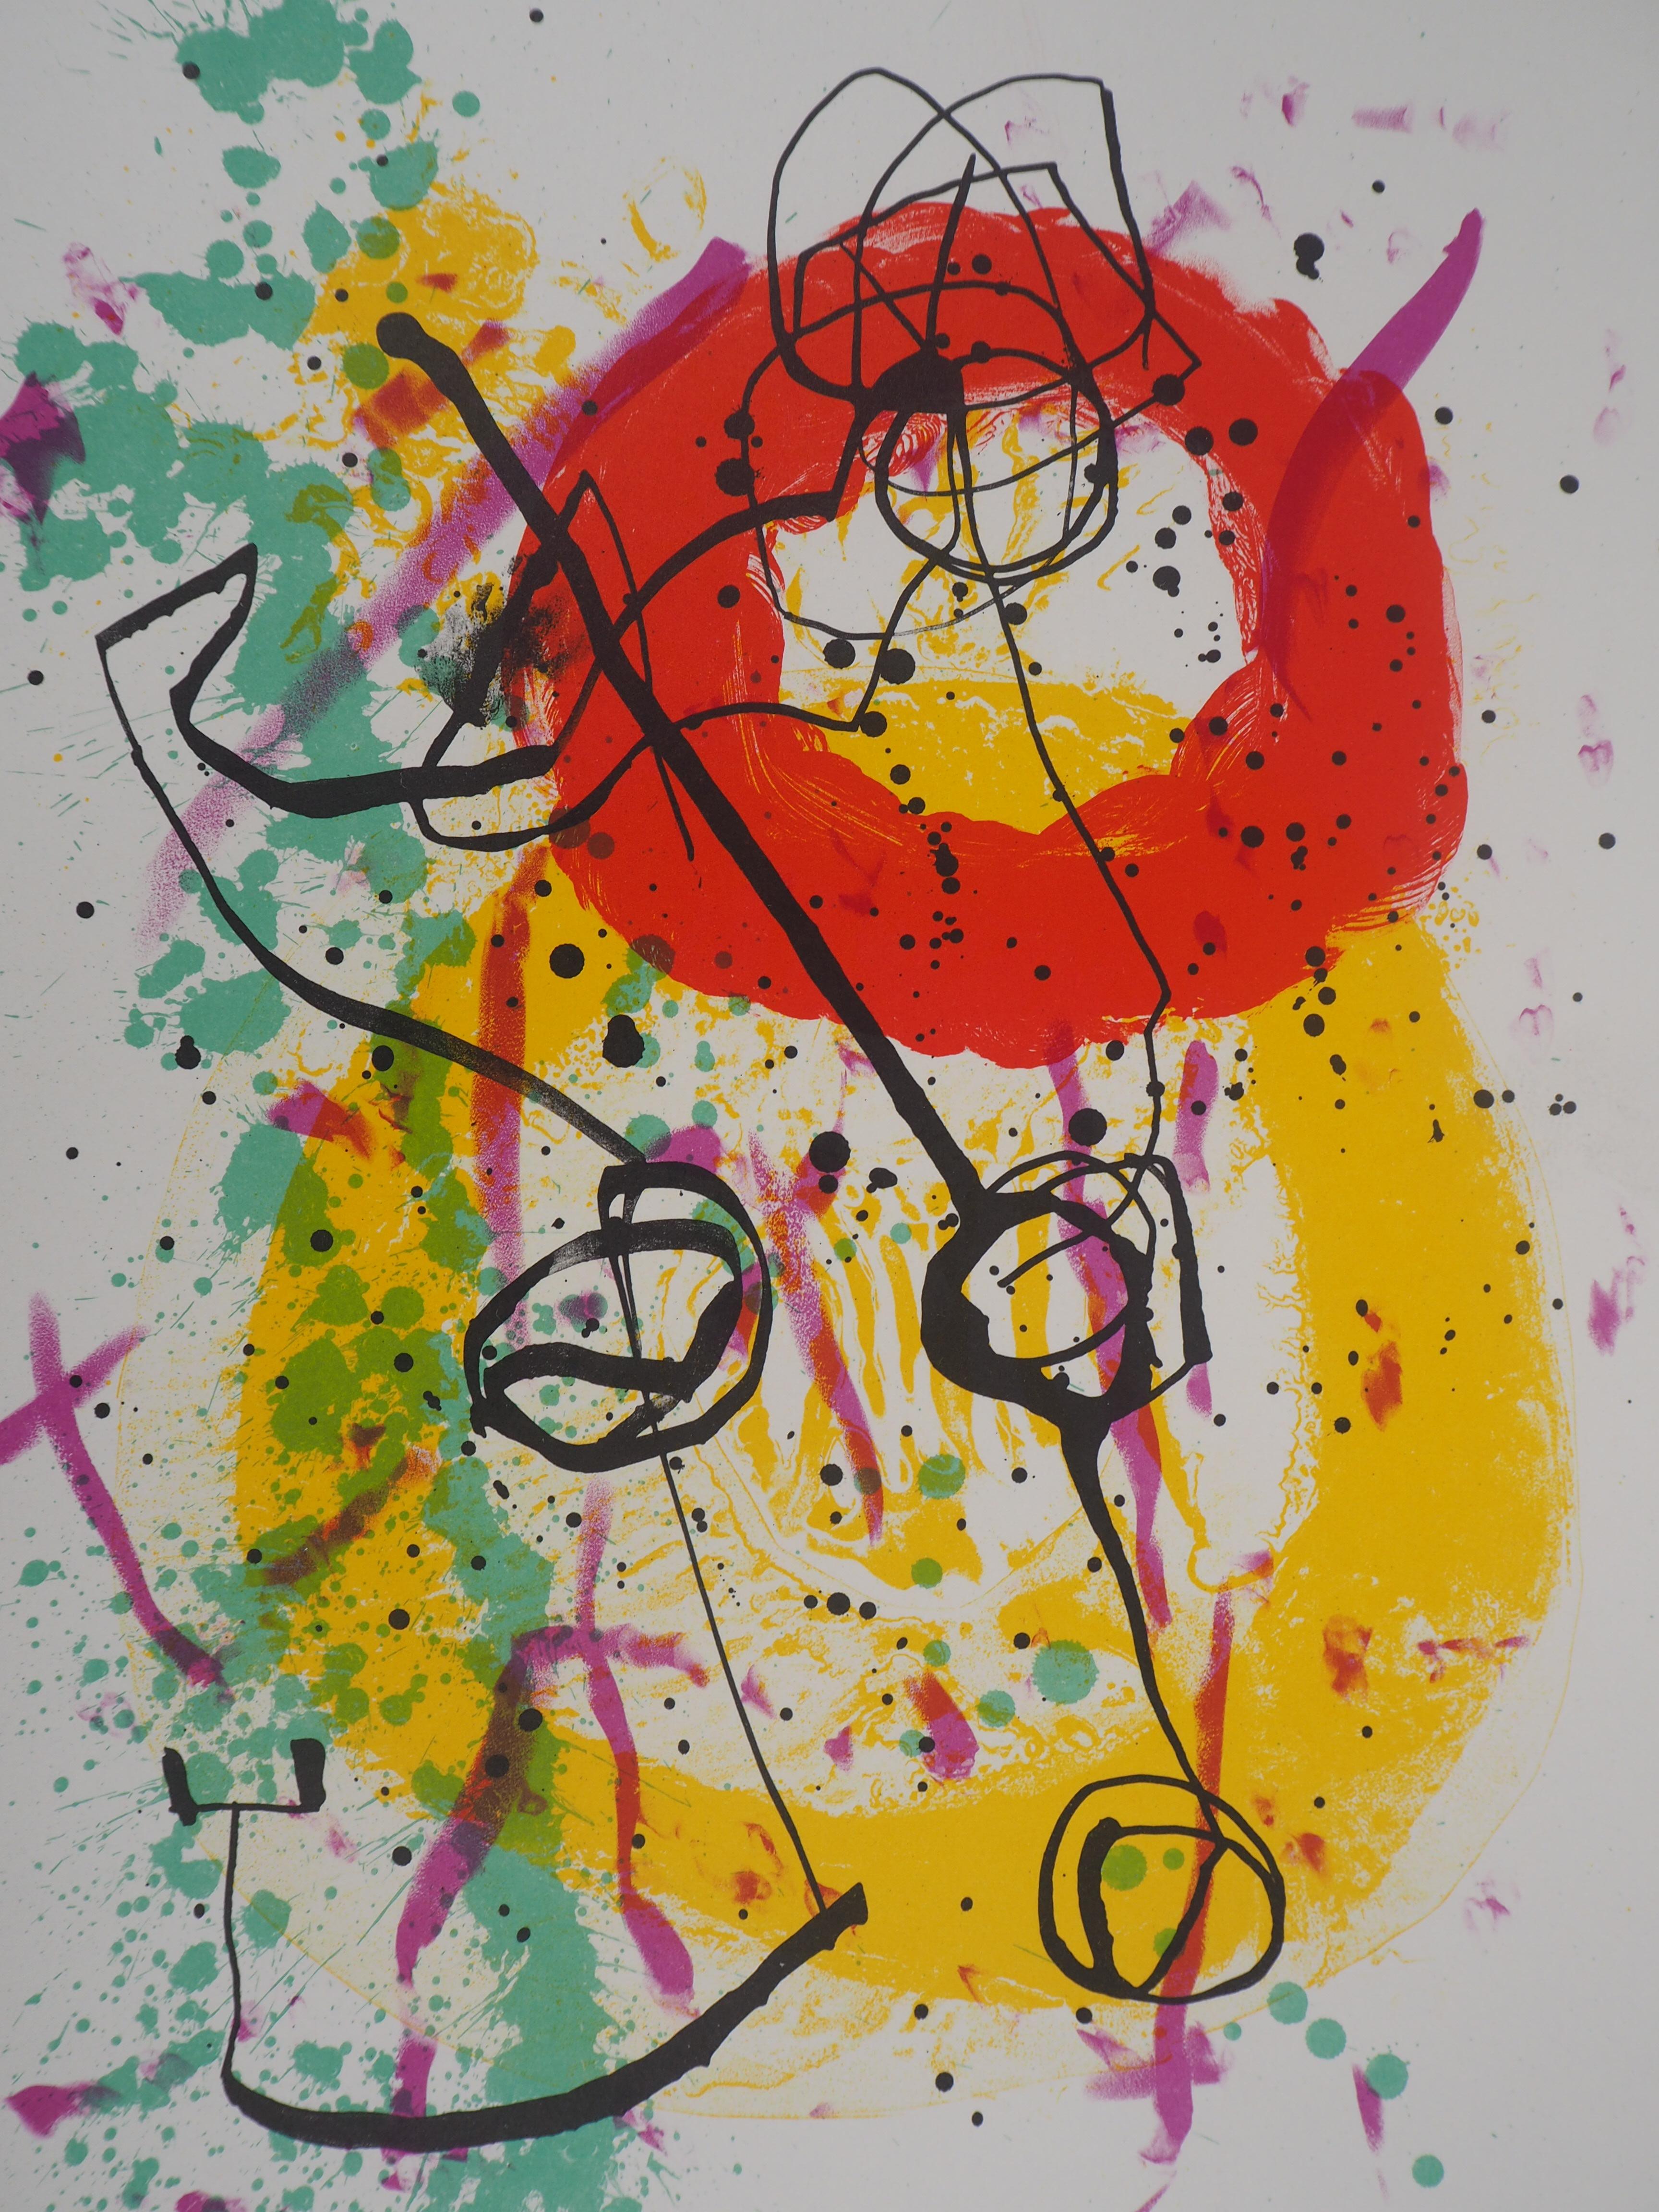 Composition with red and yellow circles - Original lithograph (Maeght #206) - Print by Joan Miró